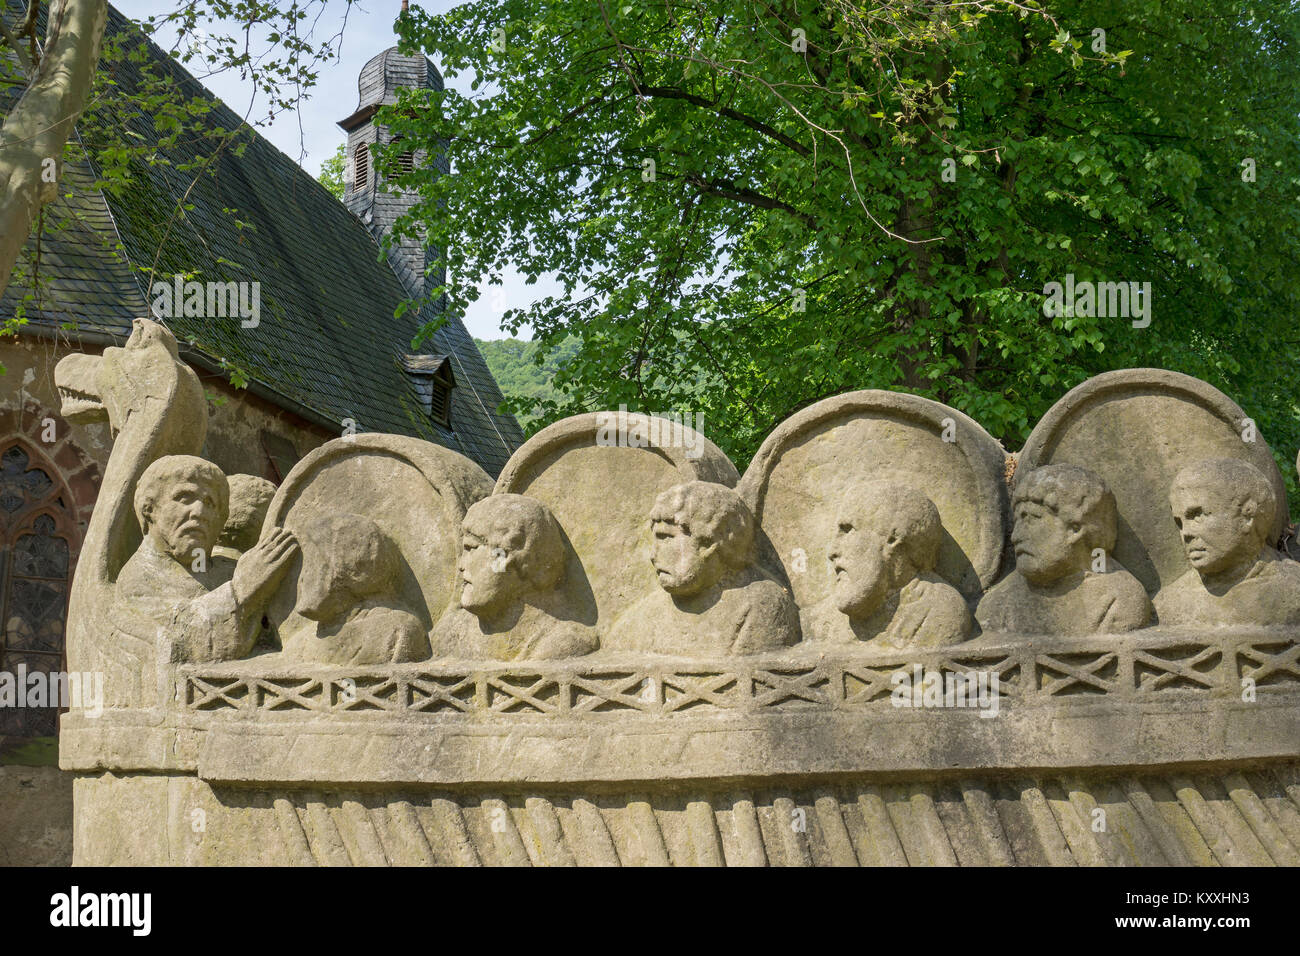 Jolly steerman, stone carving shows roman wine ship, historical find at Neumagen-Dhron, Moselle river, Rhineland-Palatinate, Germany, Europe Stock Photo